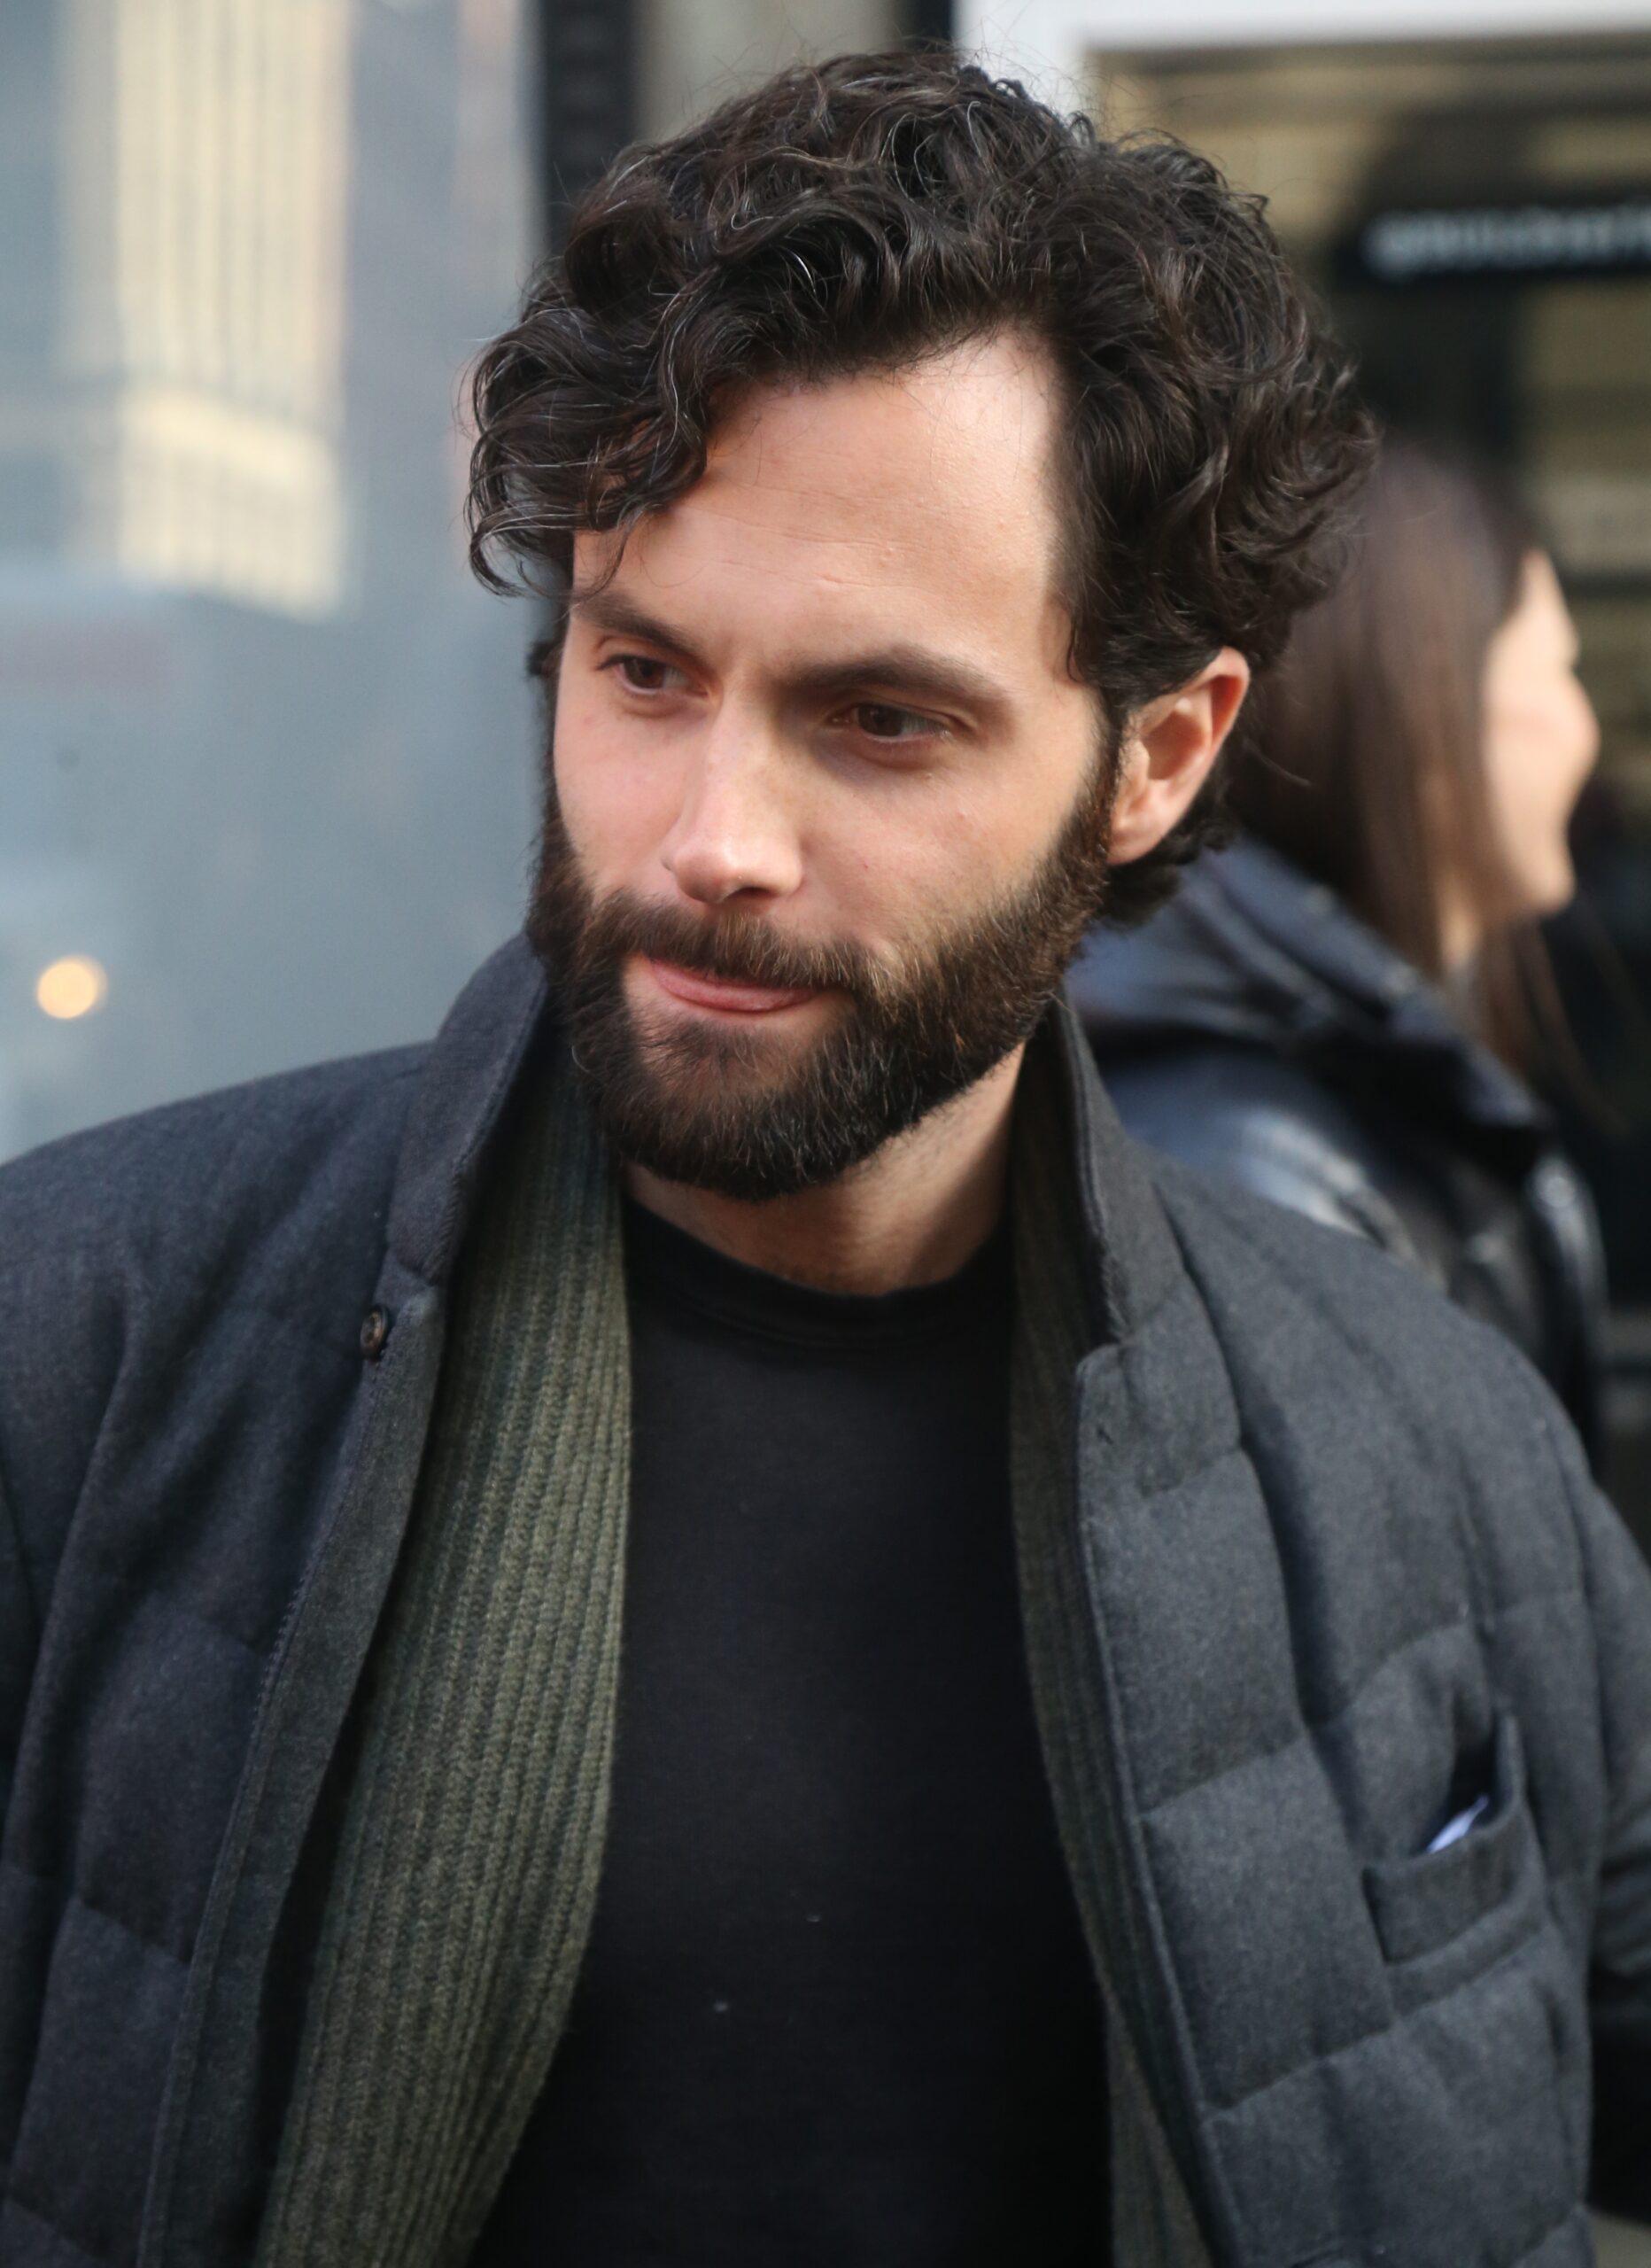 Penn Badgley says the blame for fans being attracted to Jeffrey